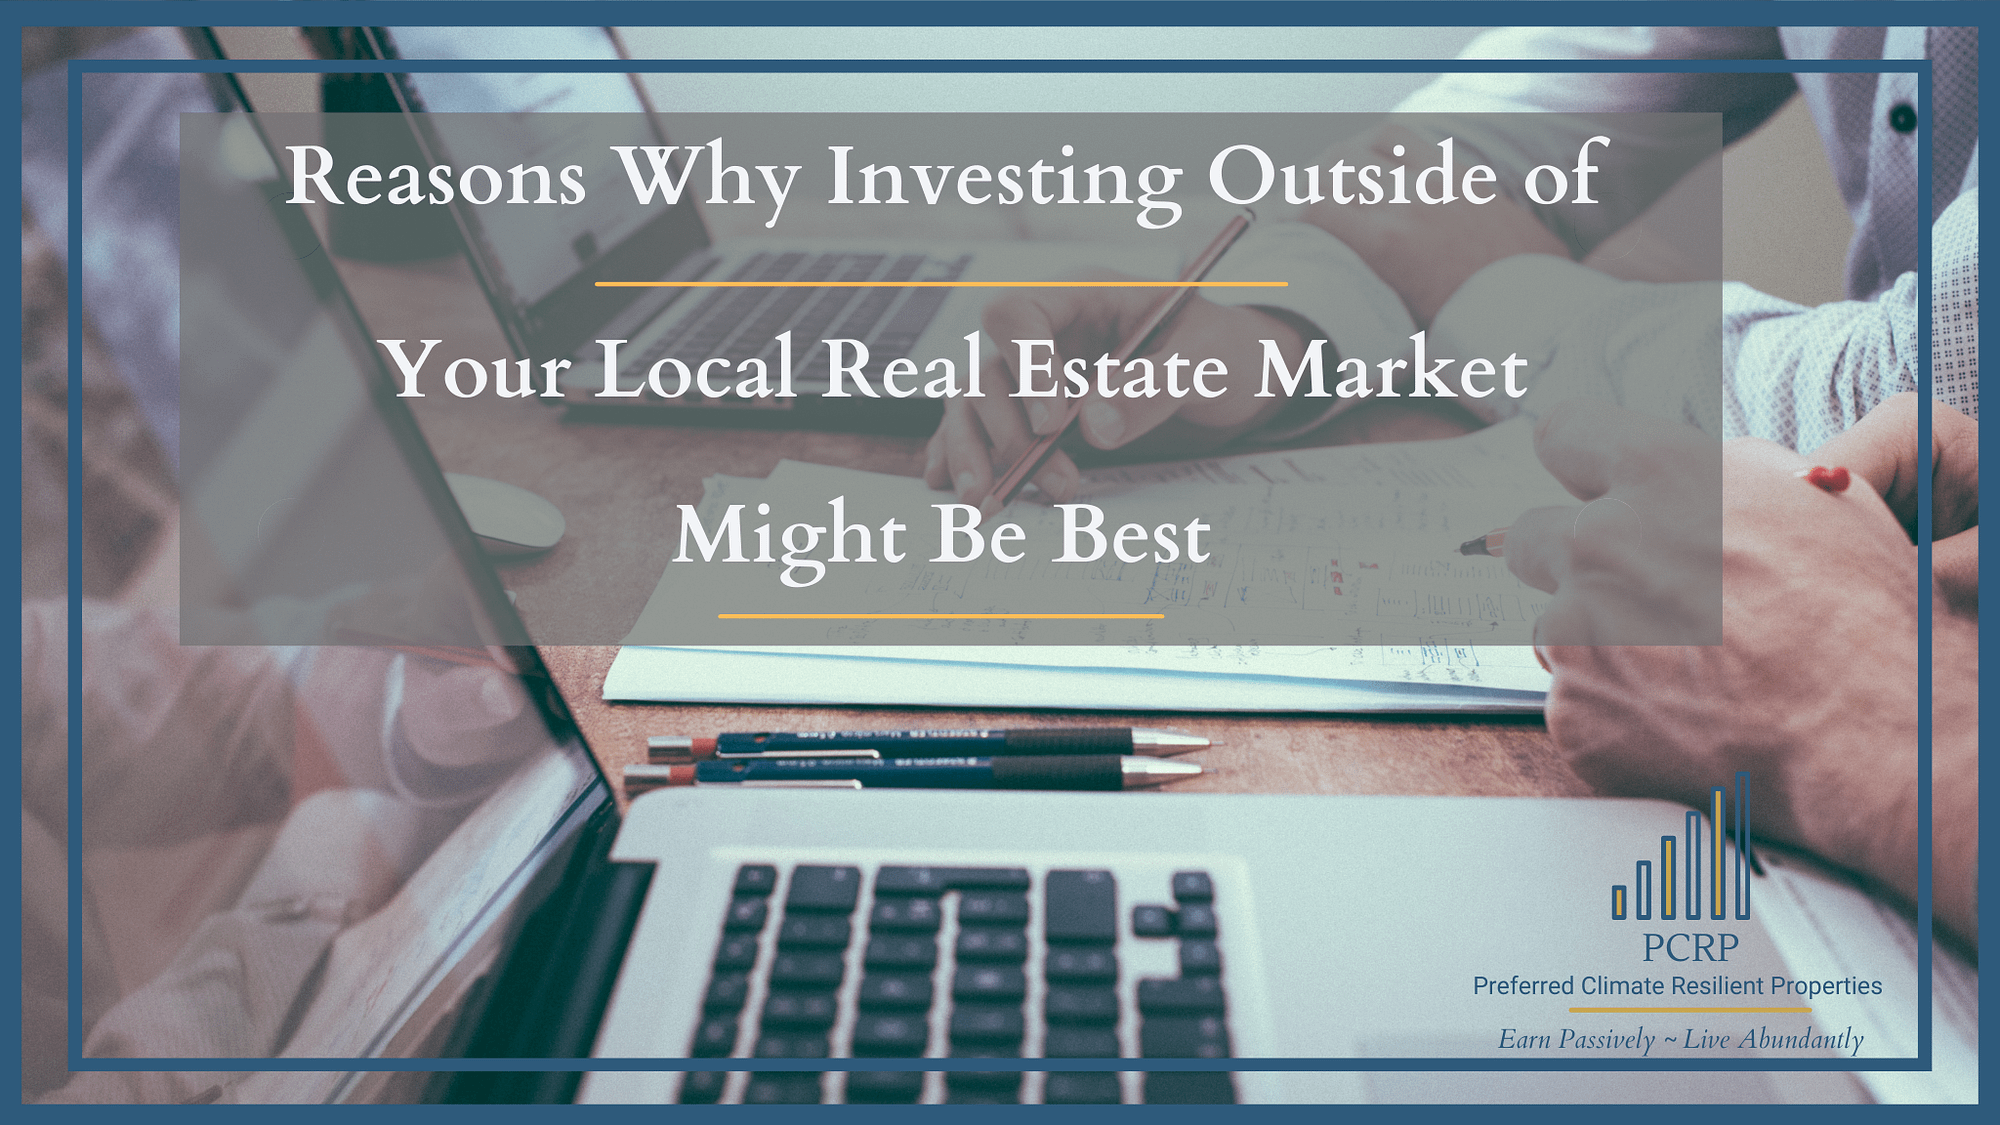 Why investing outside of your local real estate market may be best